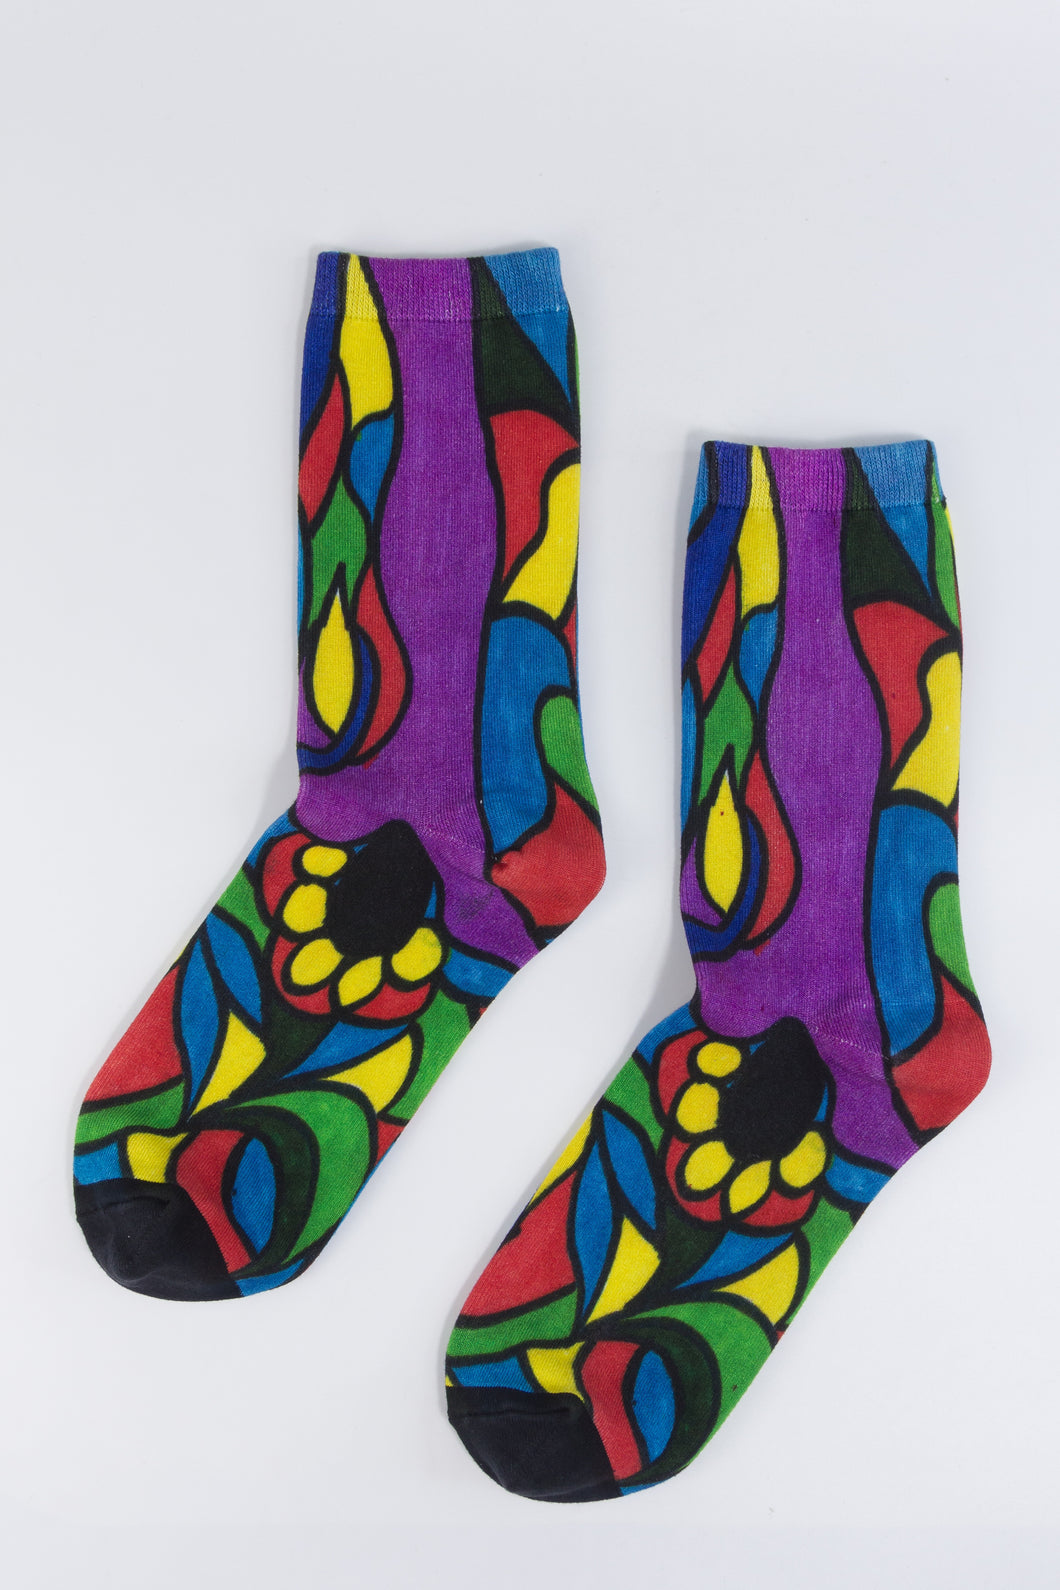 A stylistic bamboo sock with flowing whimsical designs in yellow, purple, blue, black, and red shapes.